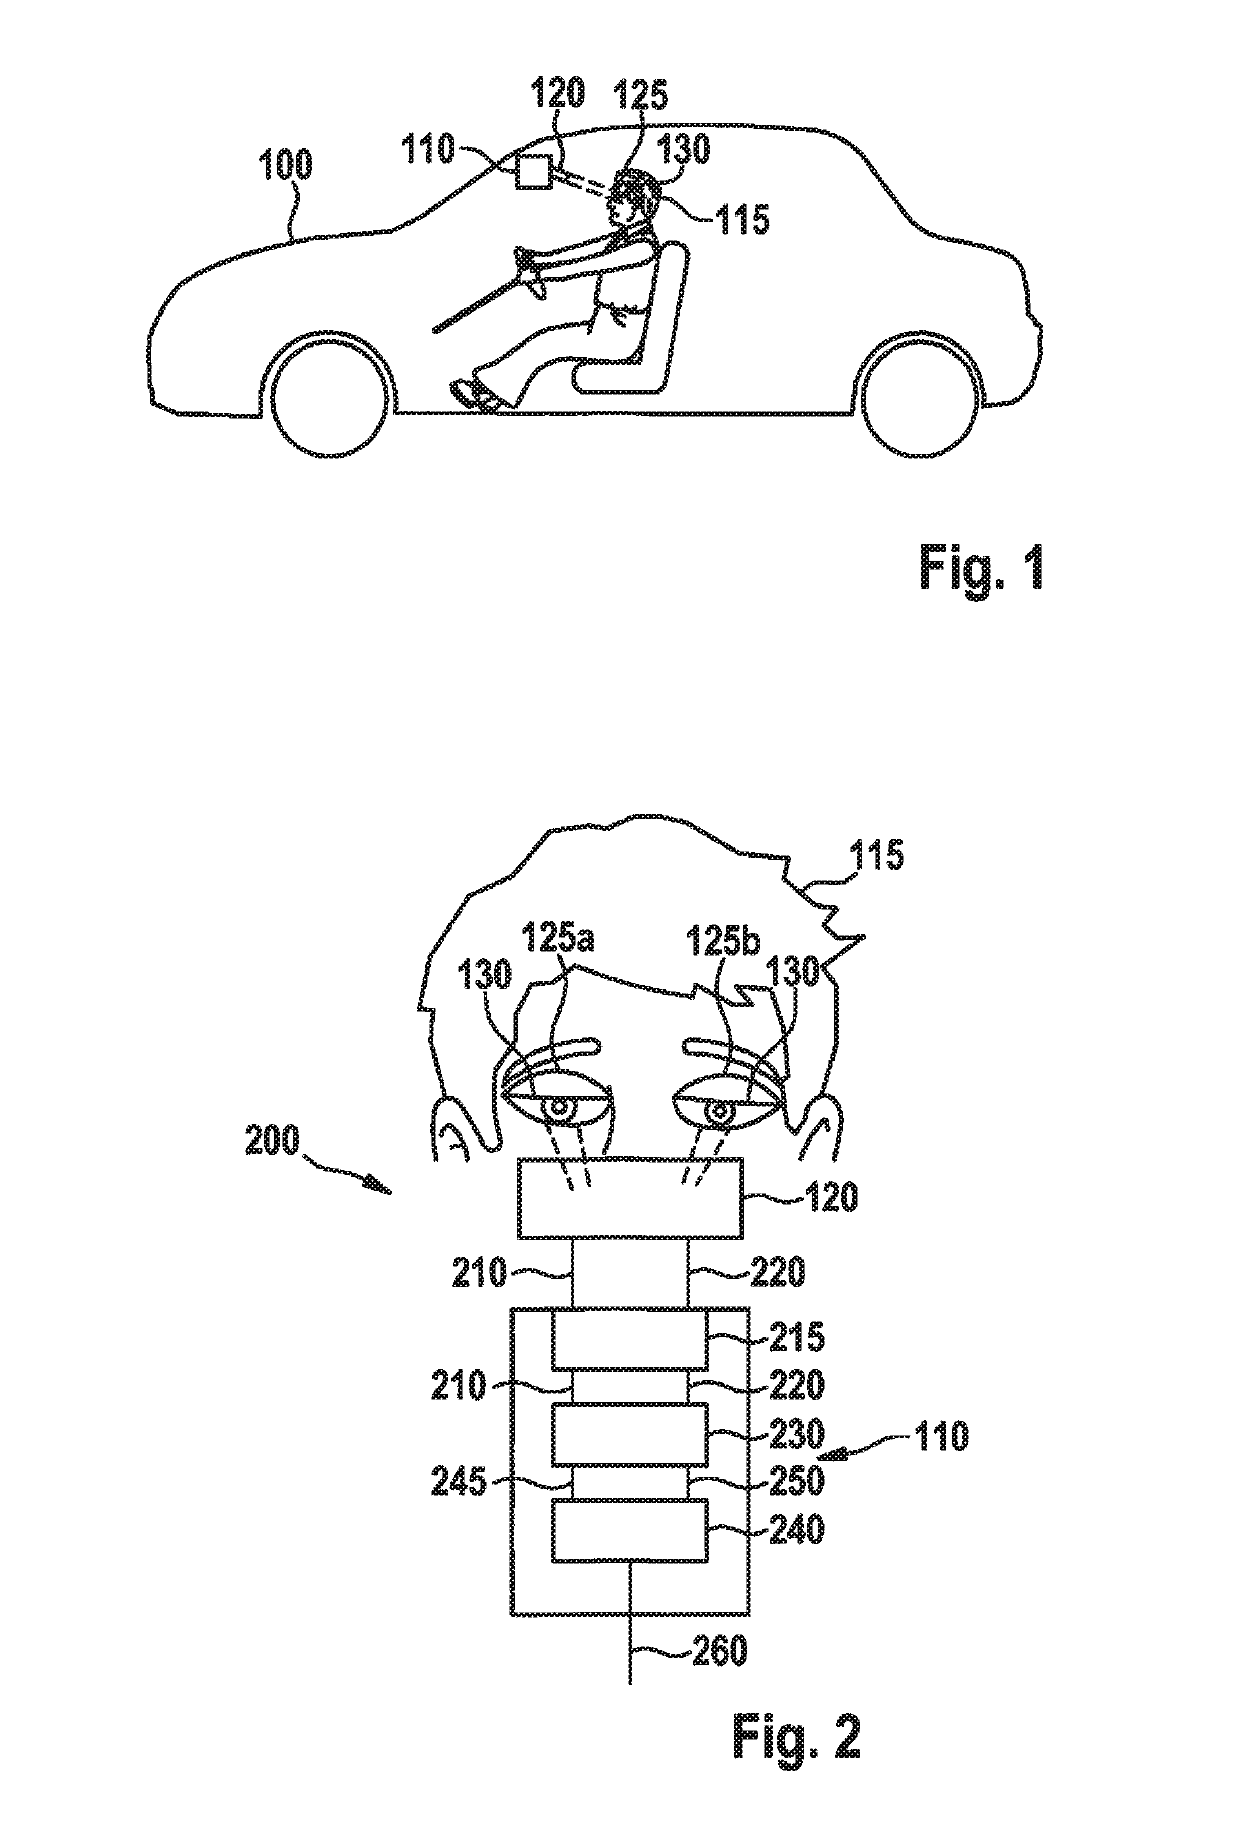 Method and device for detecting a tiredness and/or sleeping state of a driver of a vehicle